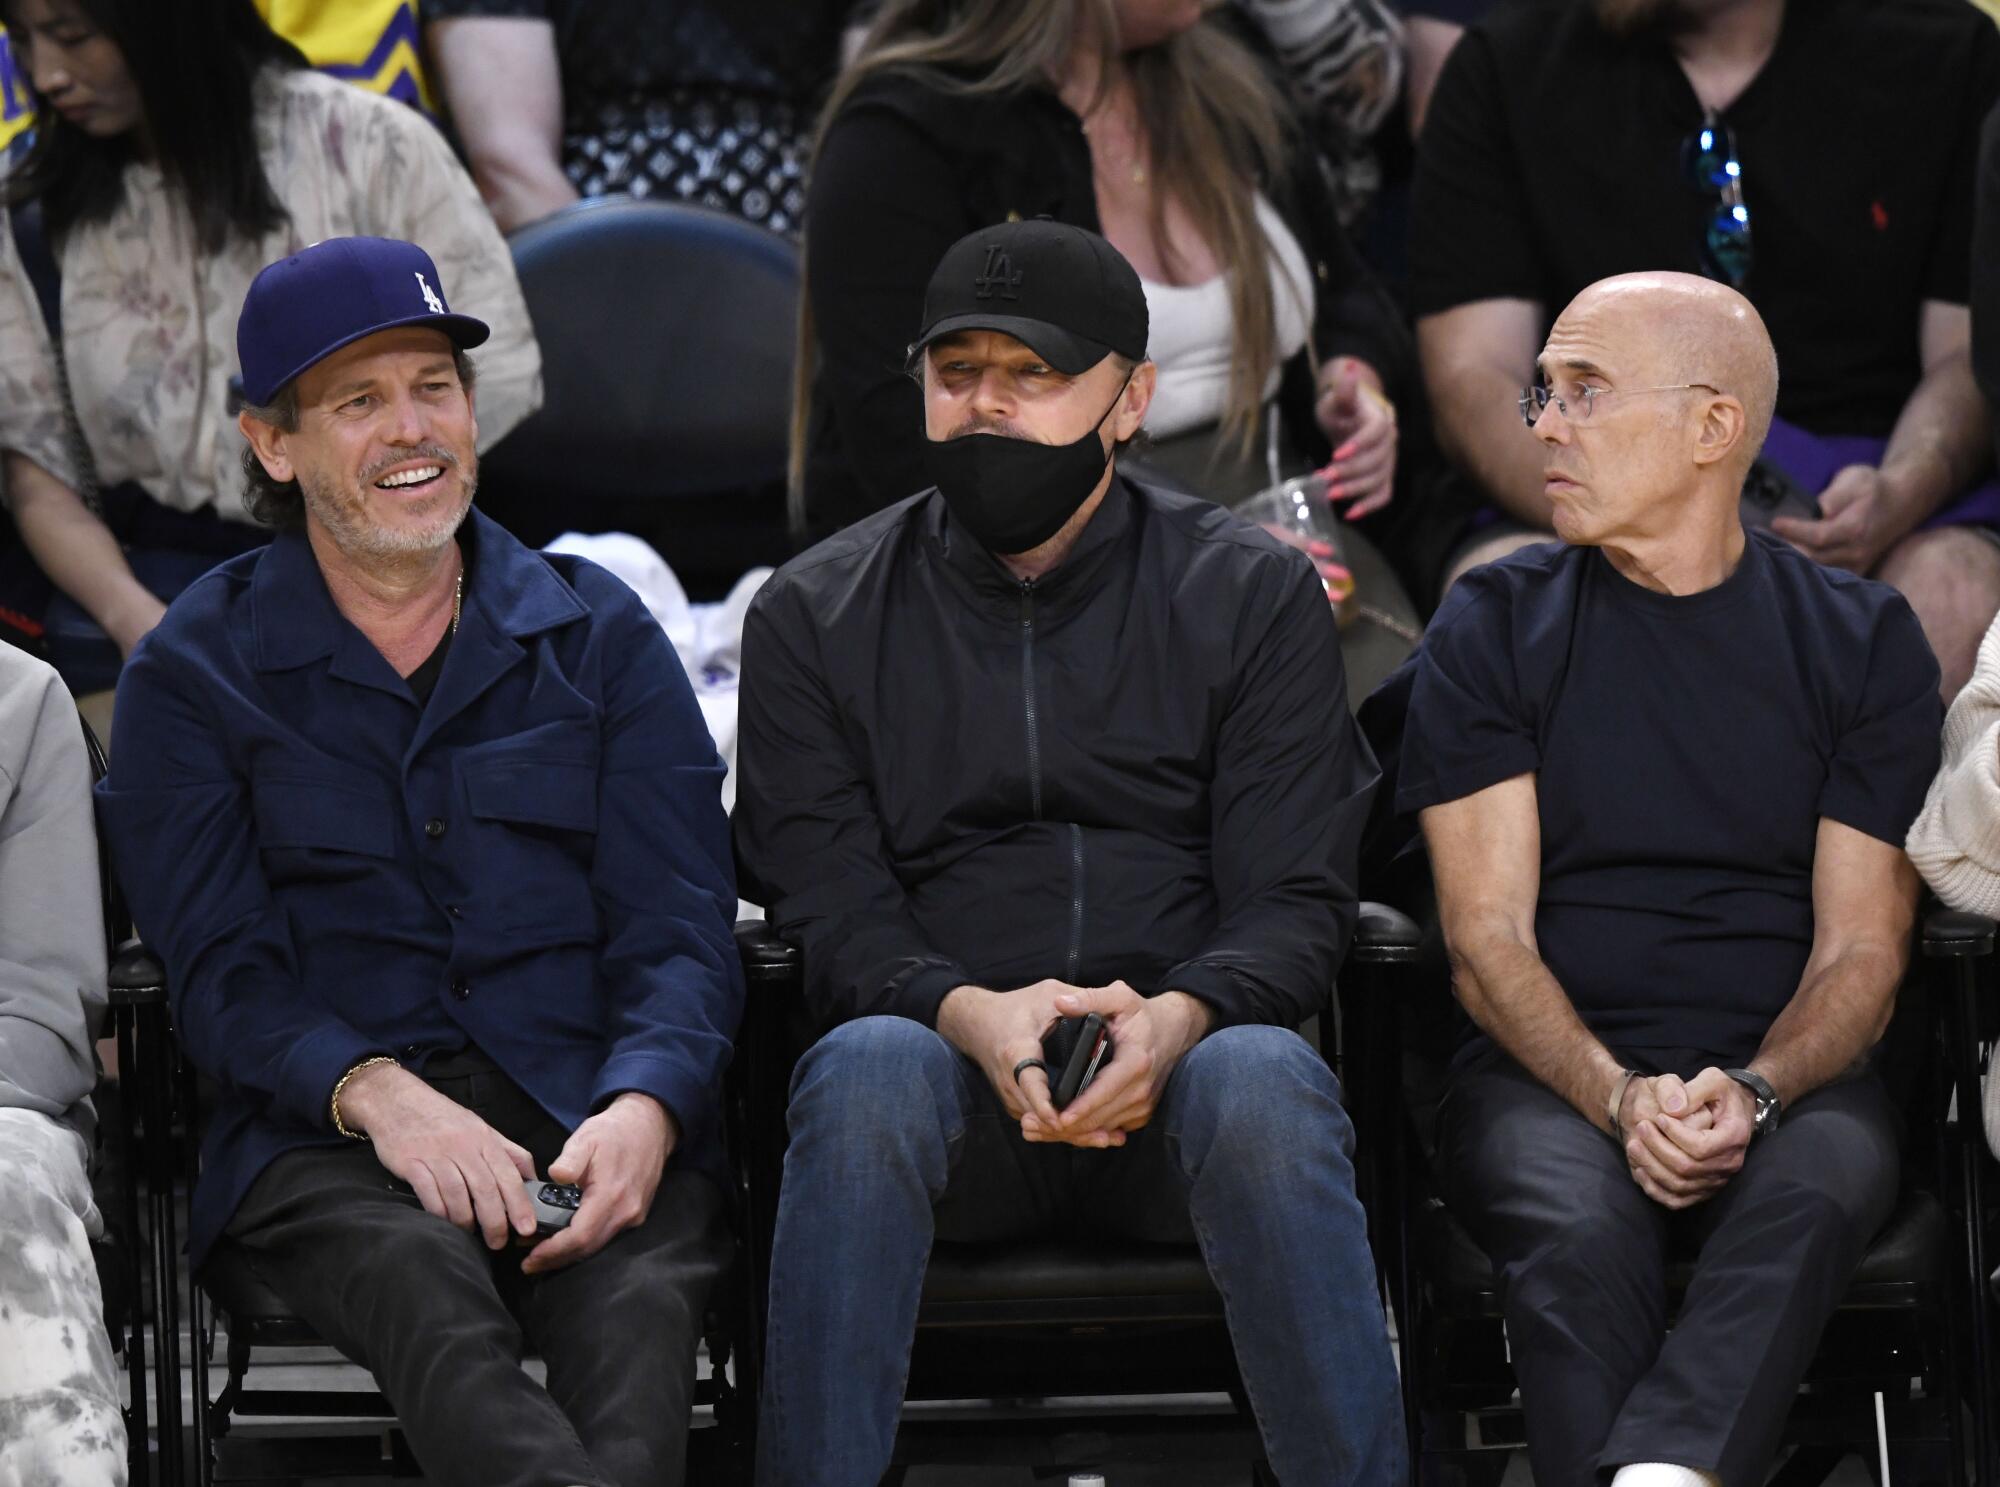 Photos: Celebrities courtside during Lakers playoff games - Los